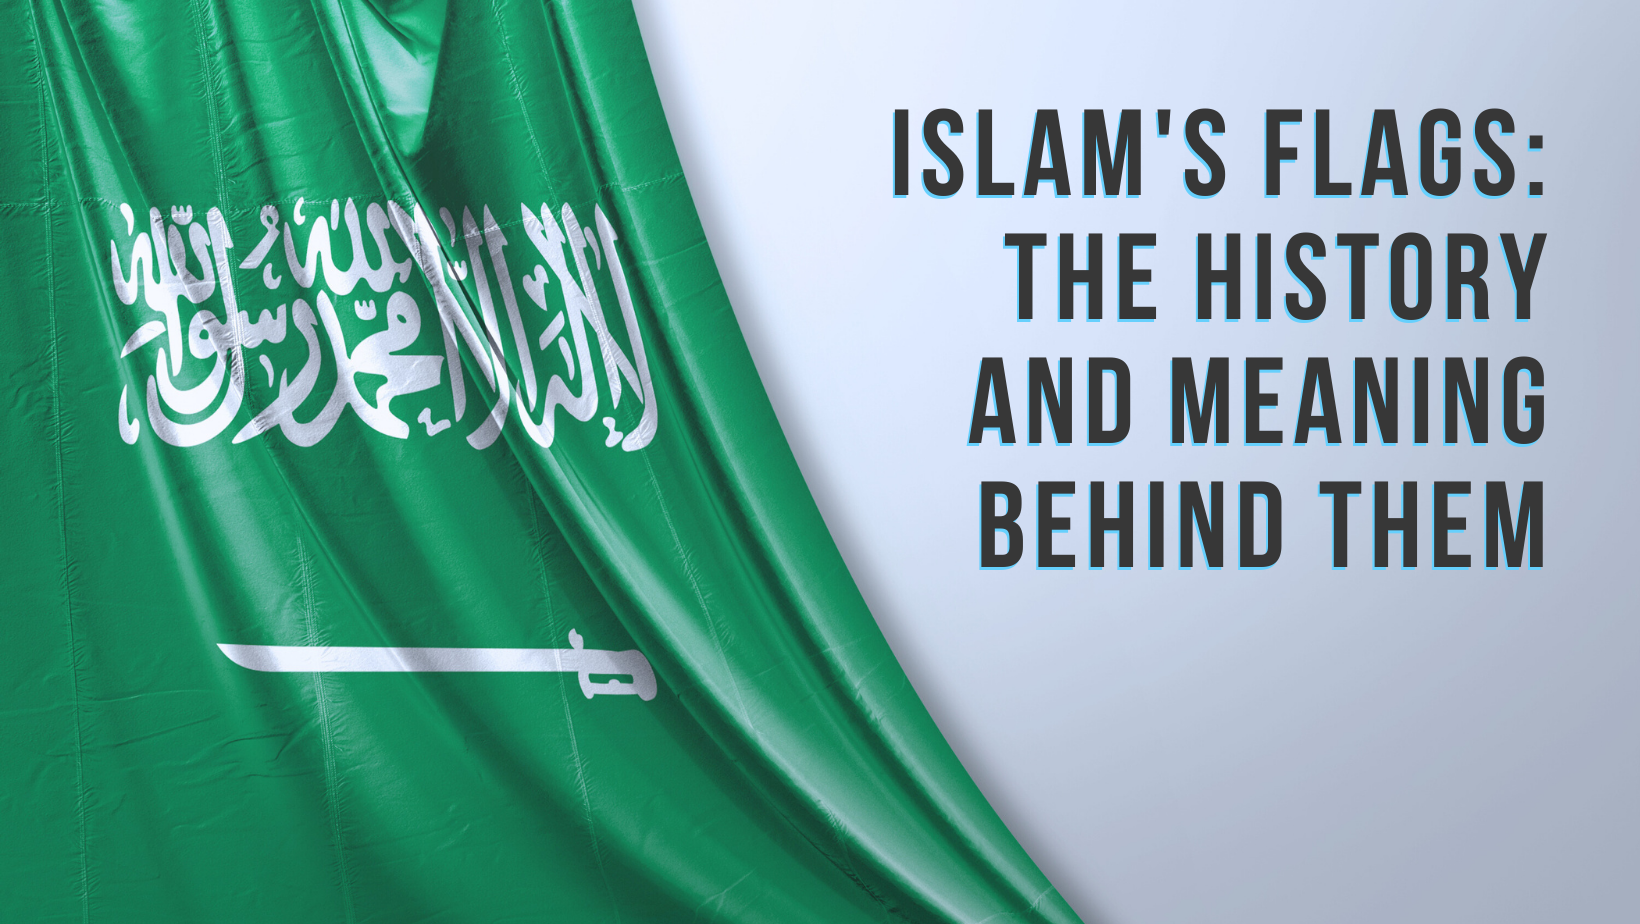 Islam's flags: The history and meaning behind them